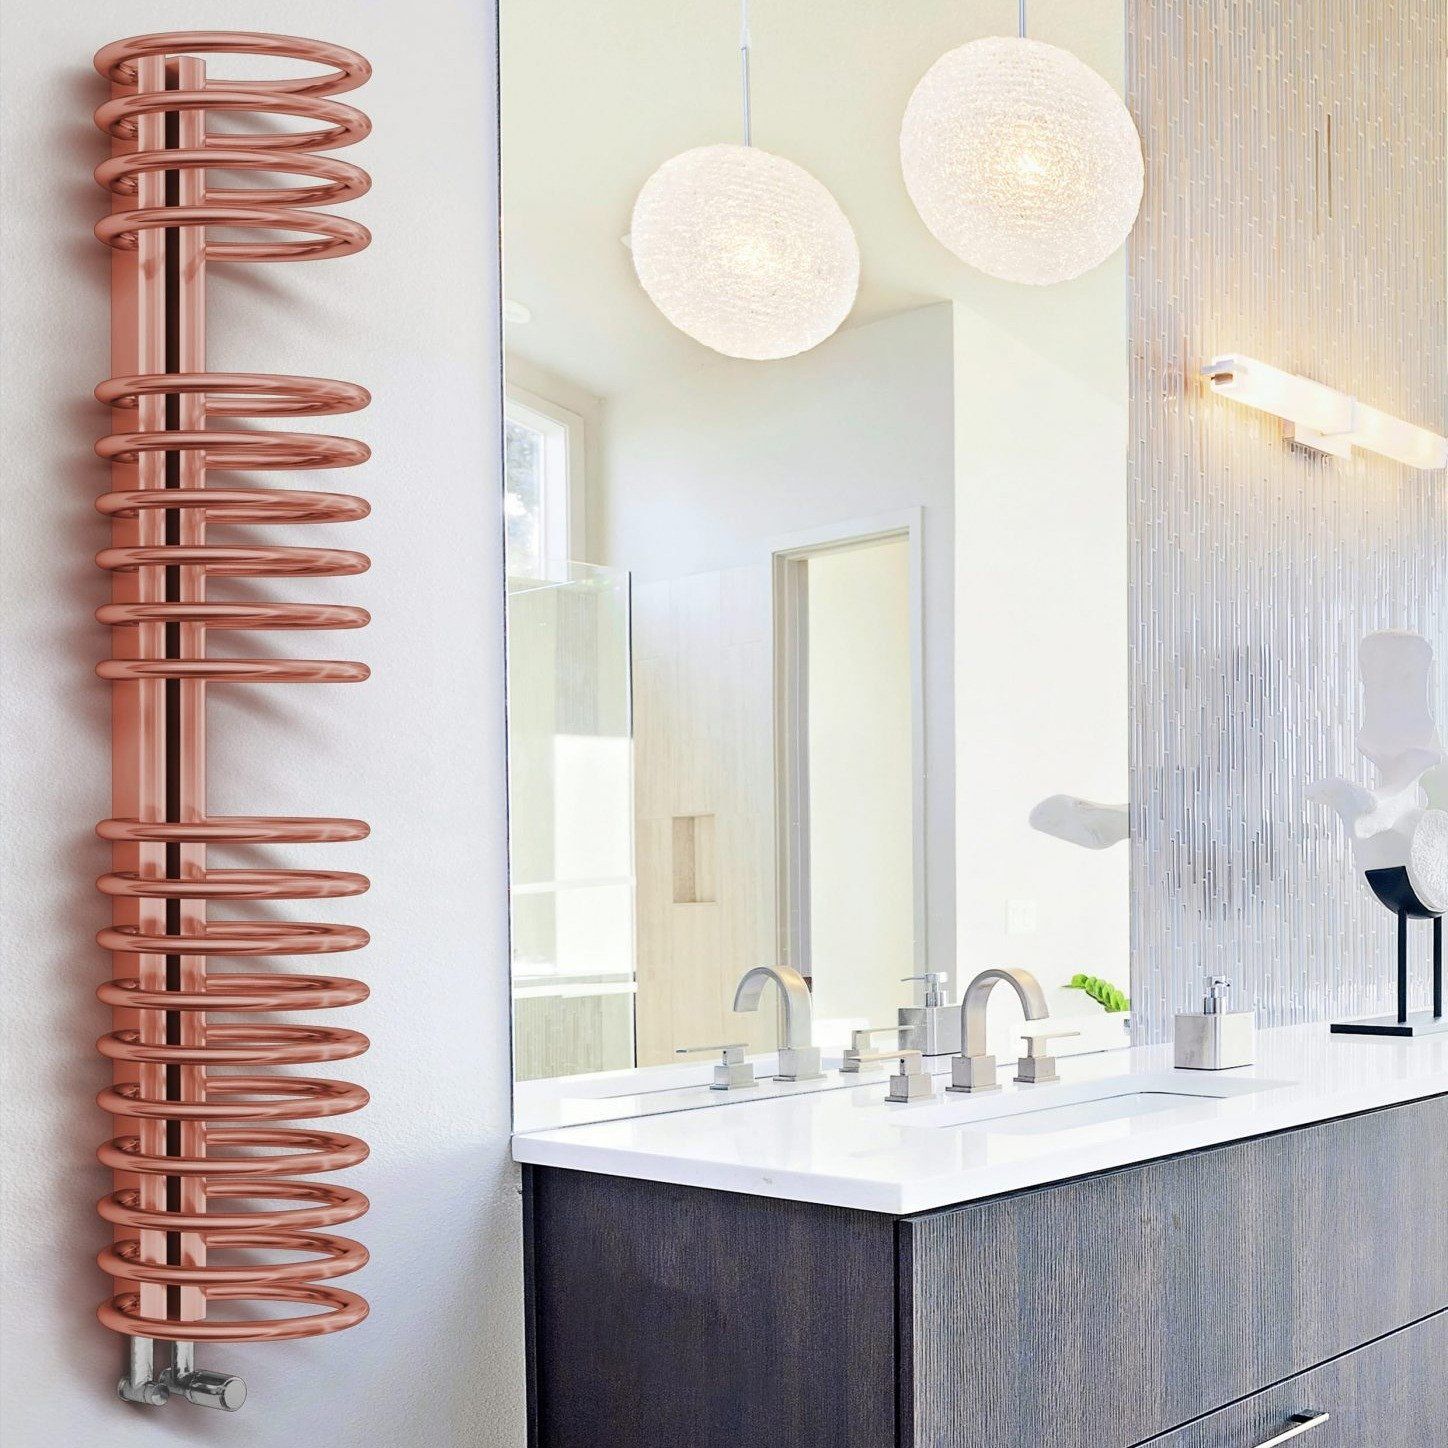 Picture of a copper coil radiator panel in a modern bathroom